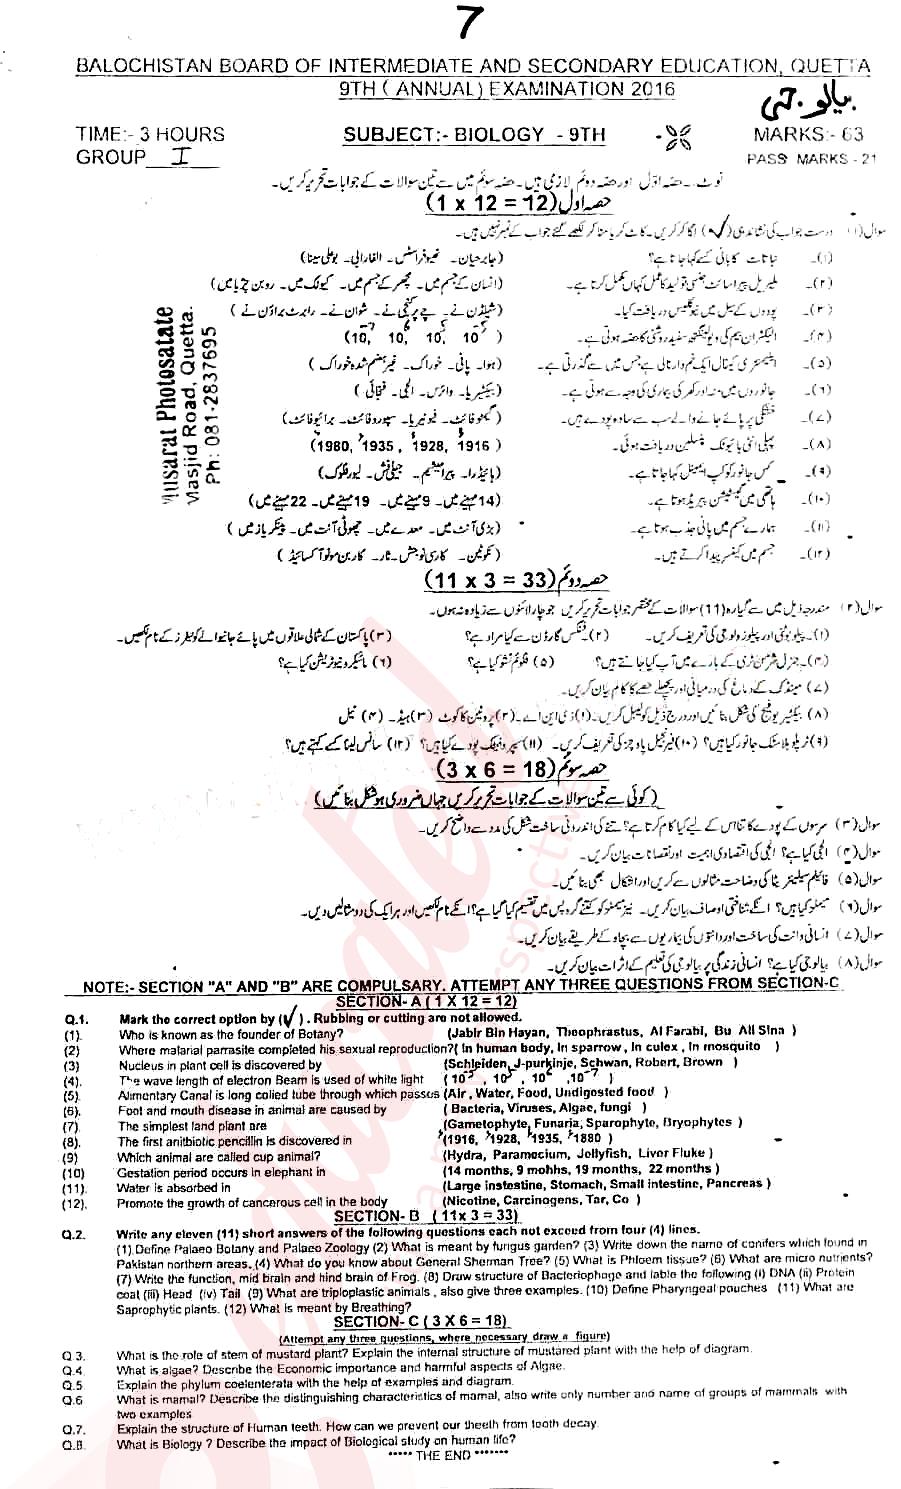 Biology 9th class Past Paper Group 1 BISE Quetta 2016